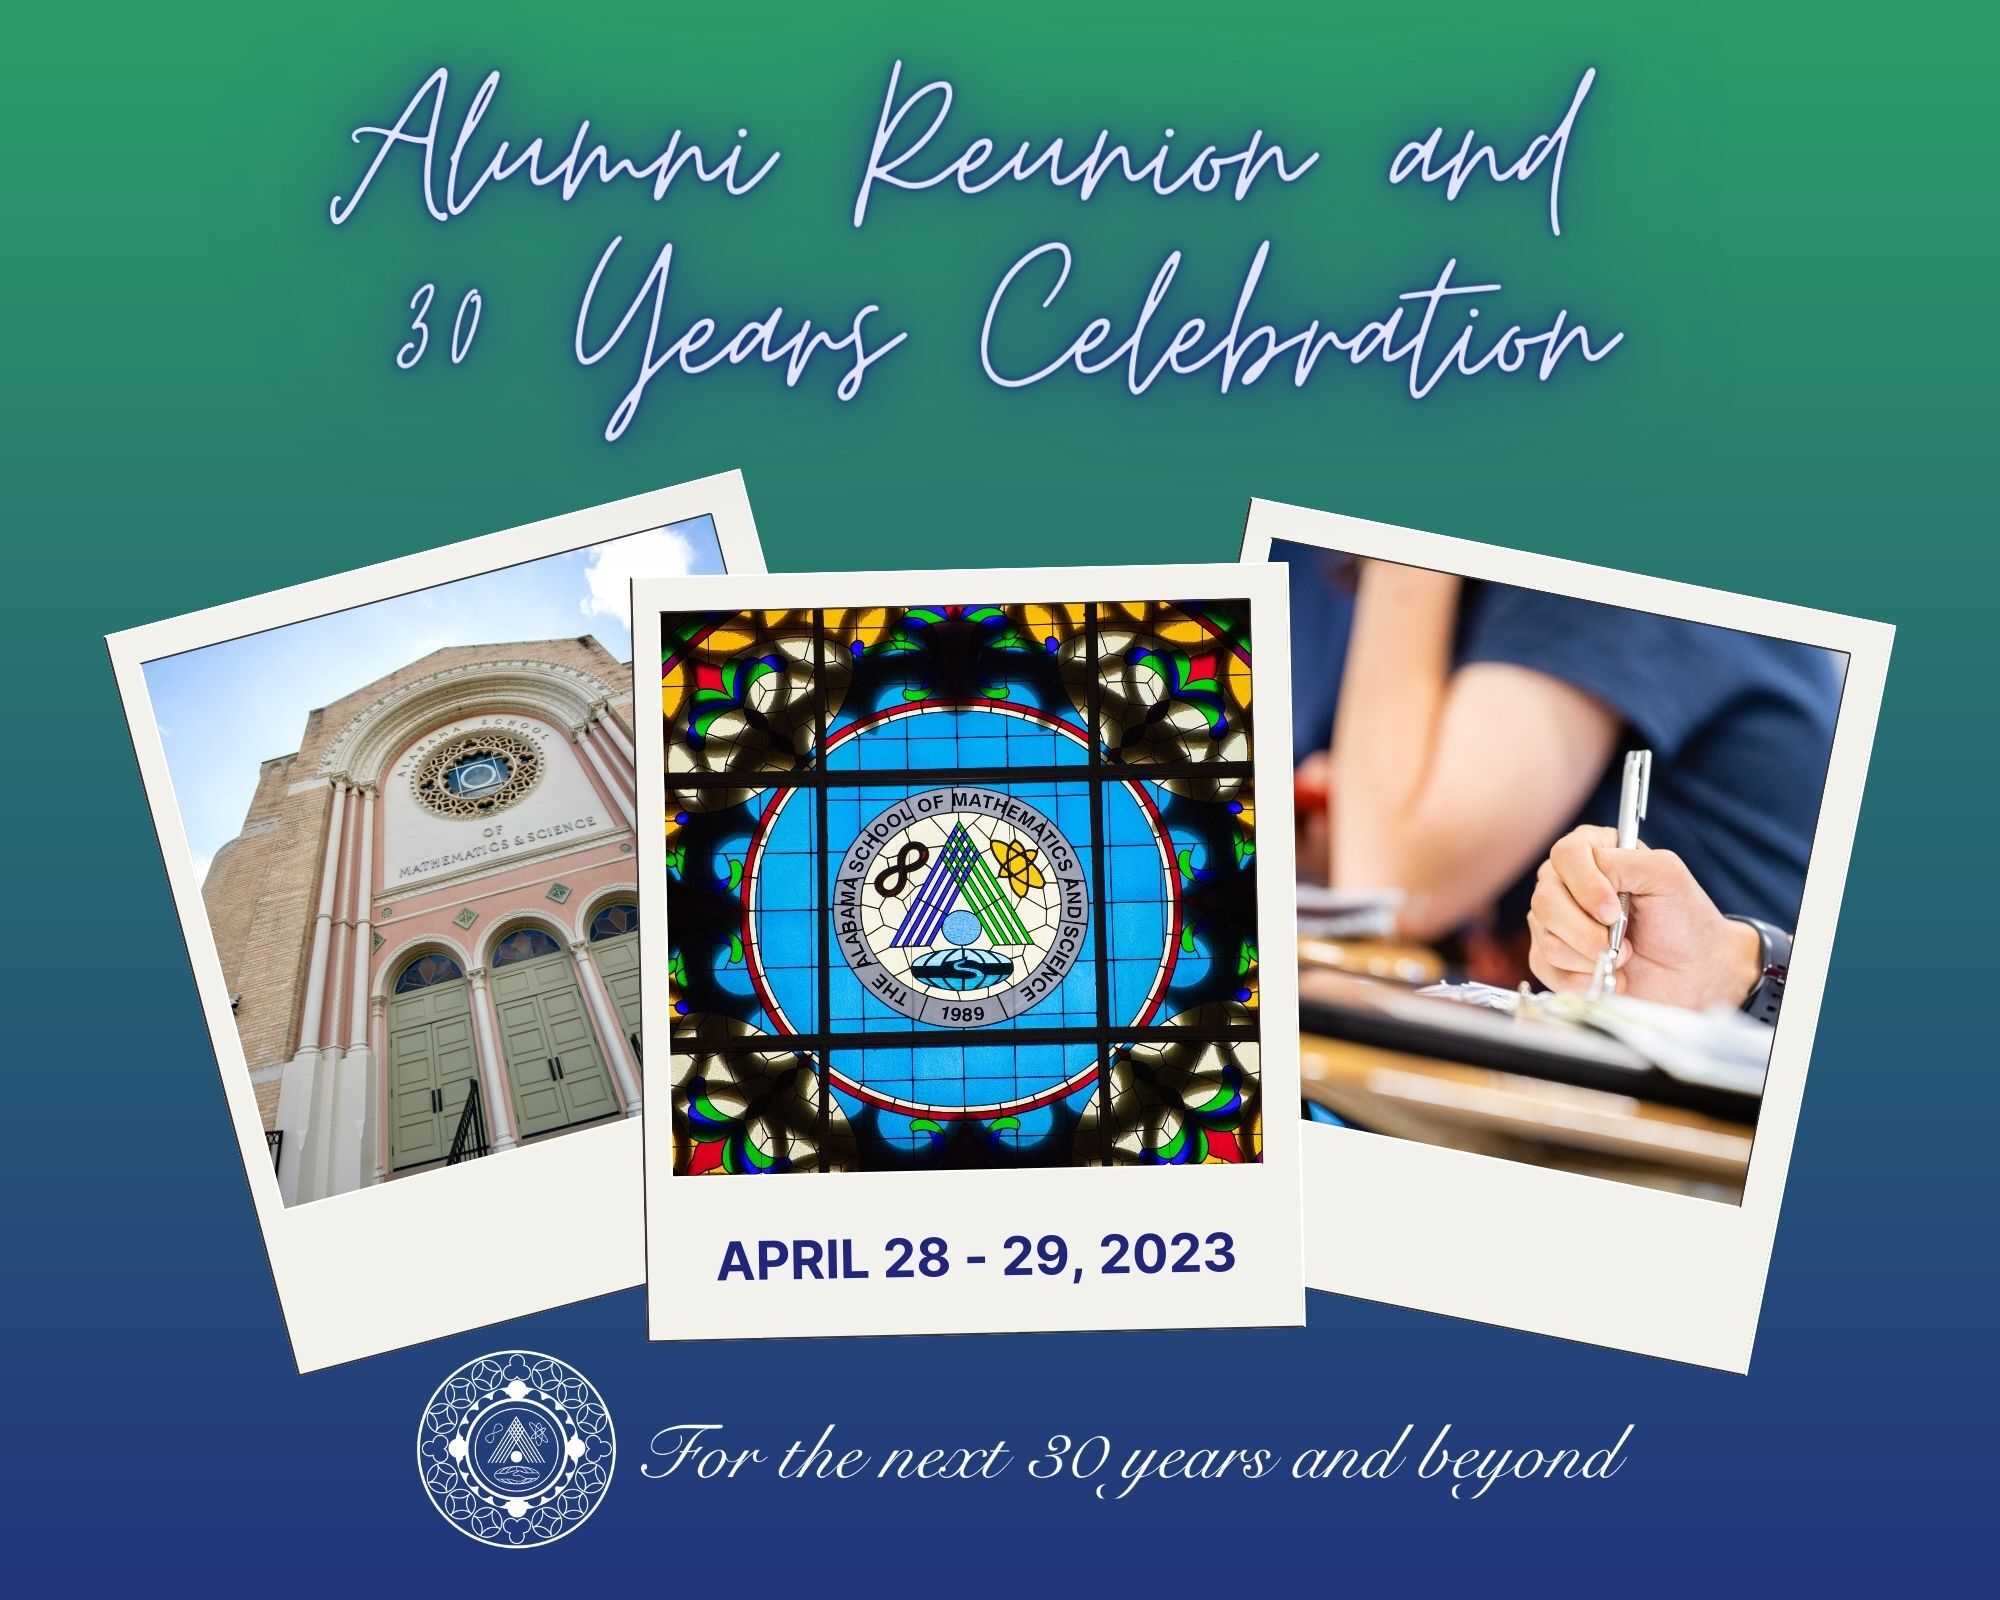 30 Years Celebration and Reunion Graphic